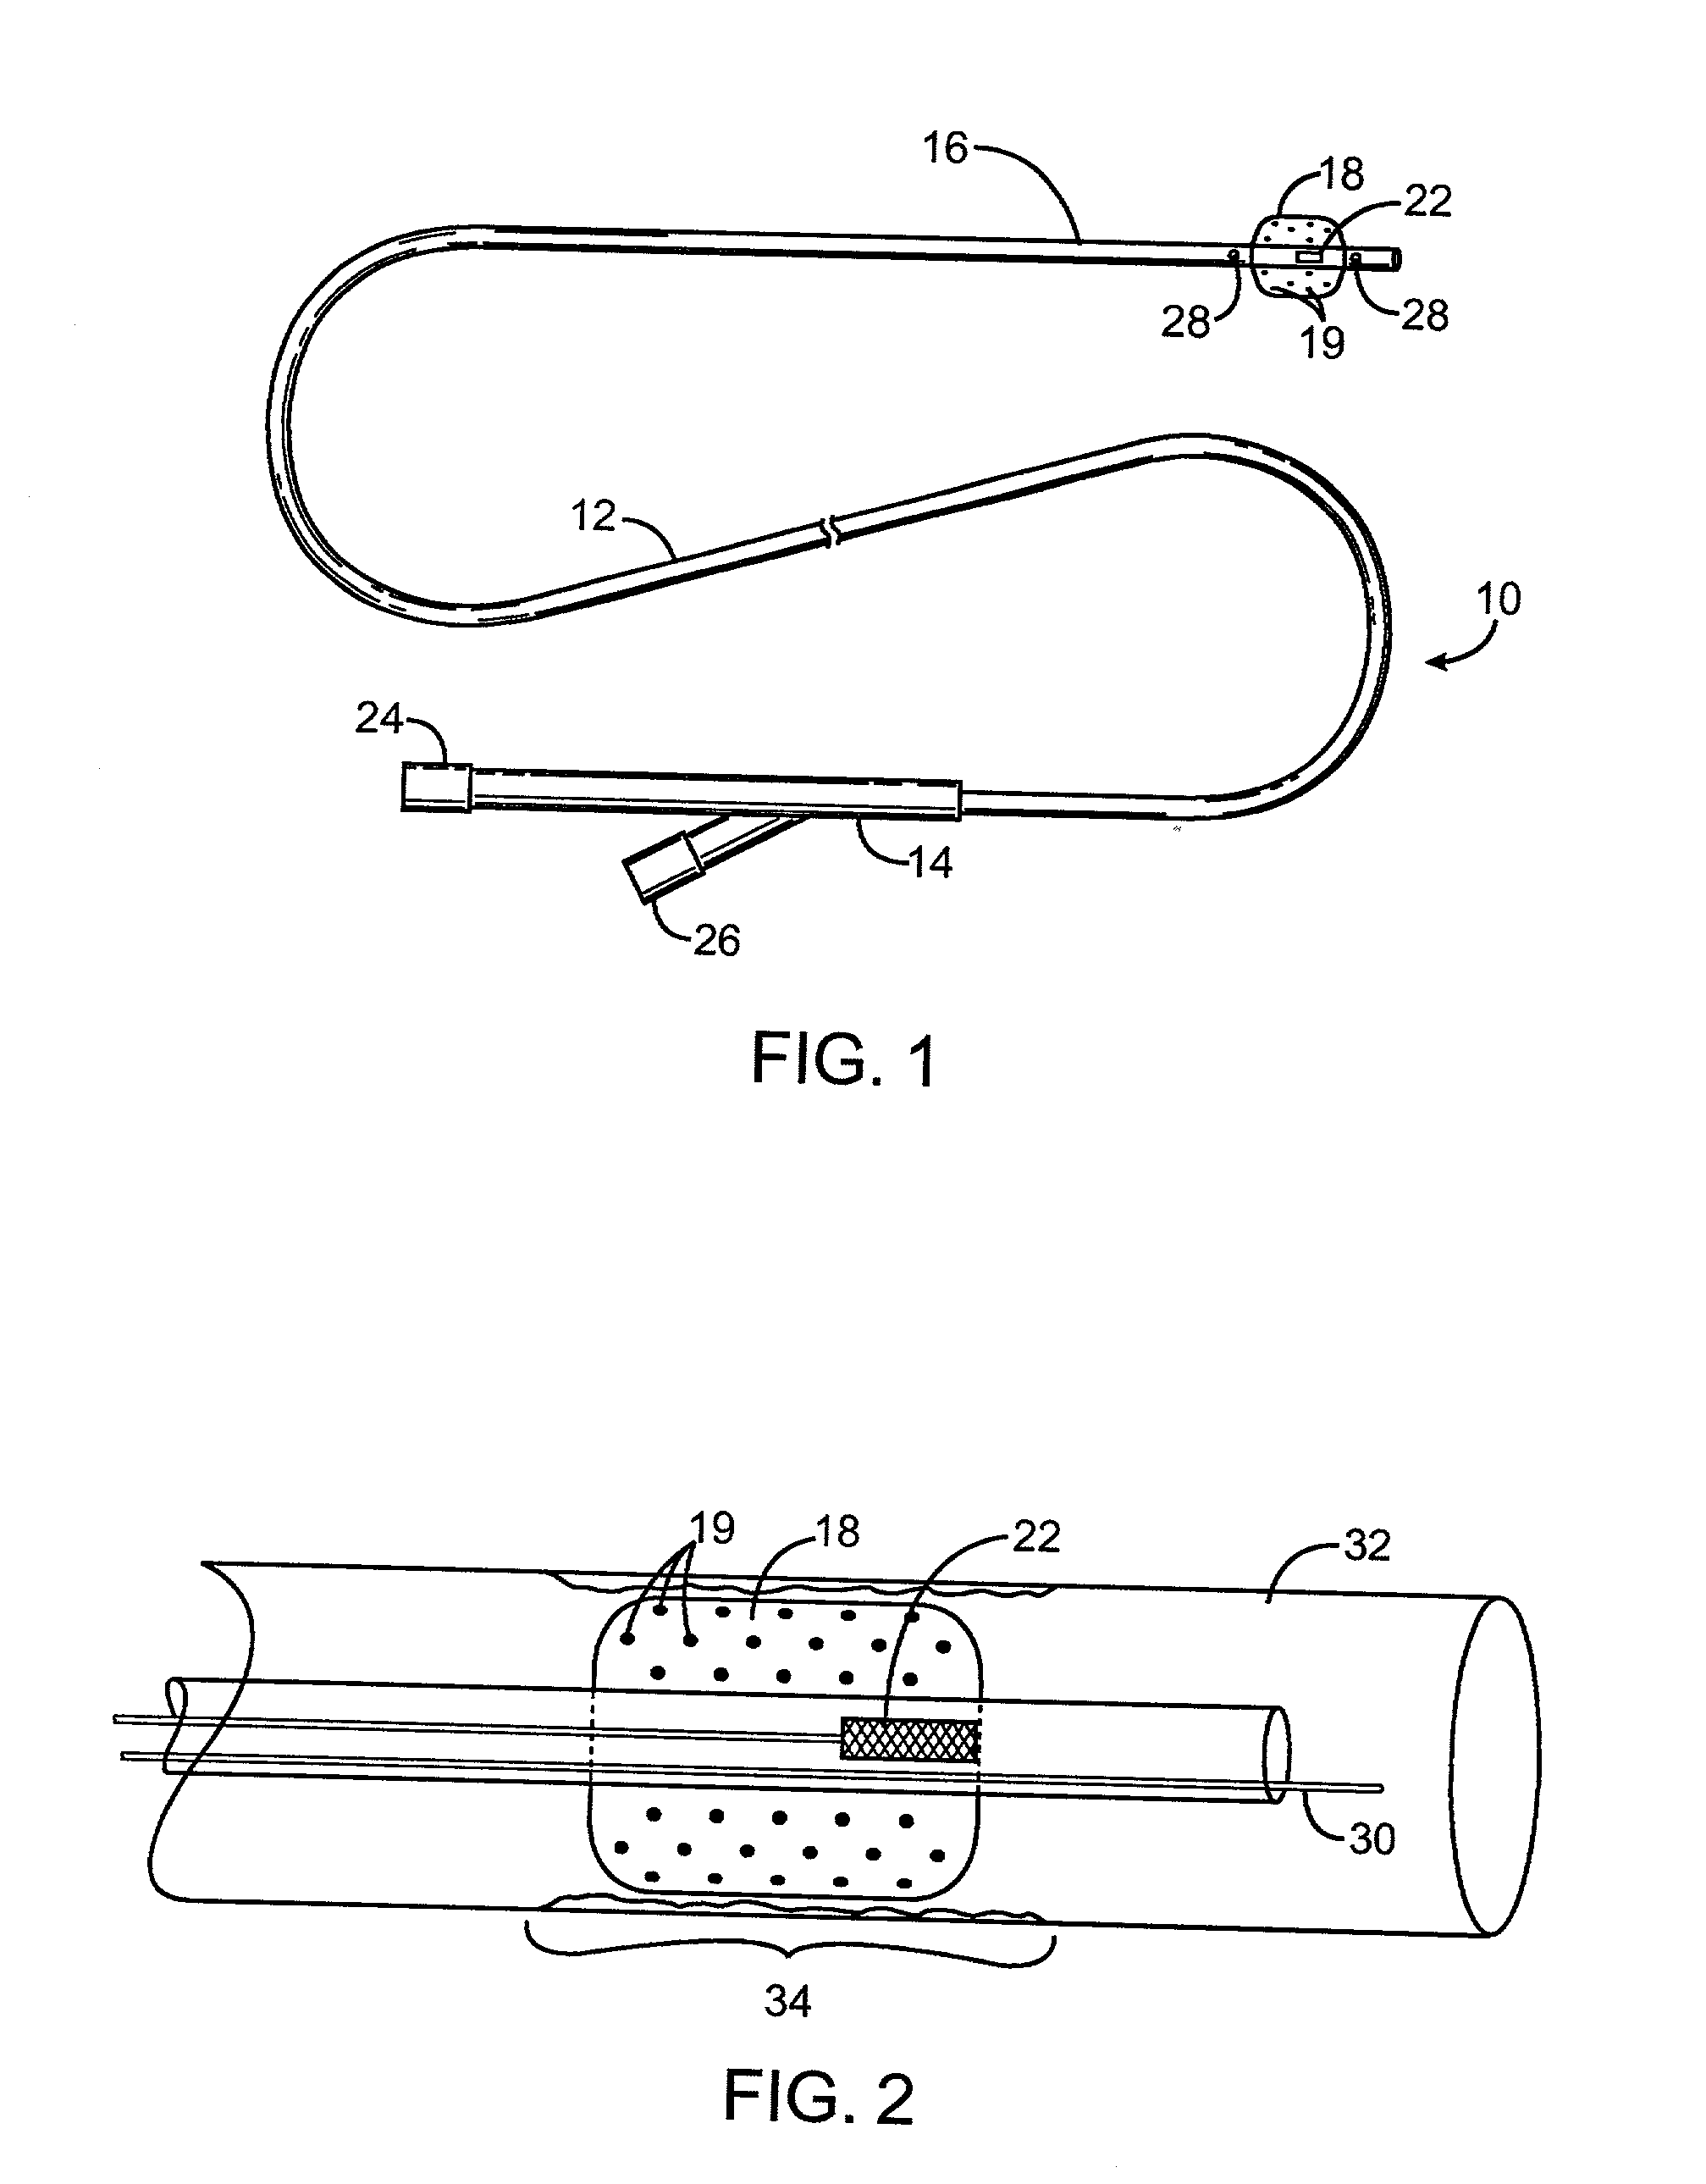 Combination ionizing radiation and immunomodulator delivery devices and methods for inhibiting hyperplasia